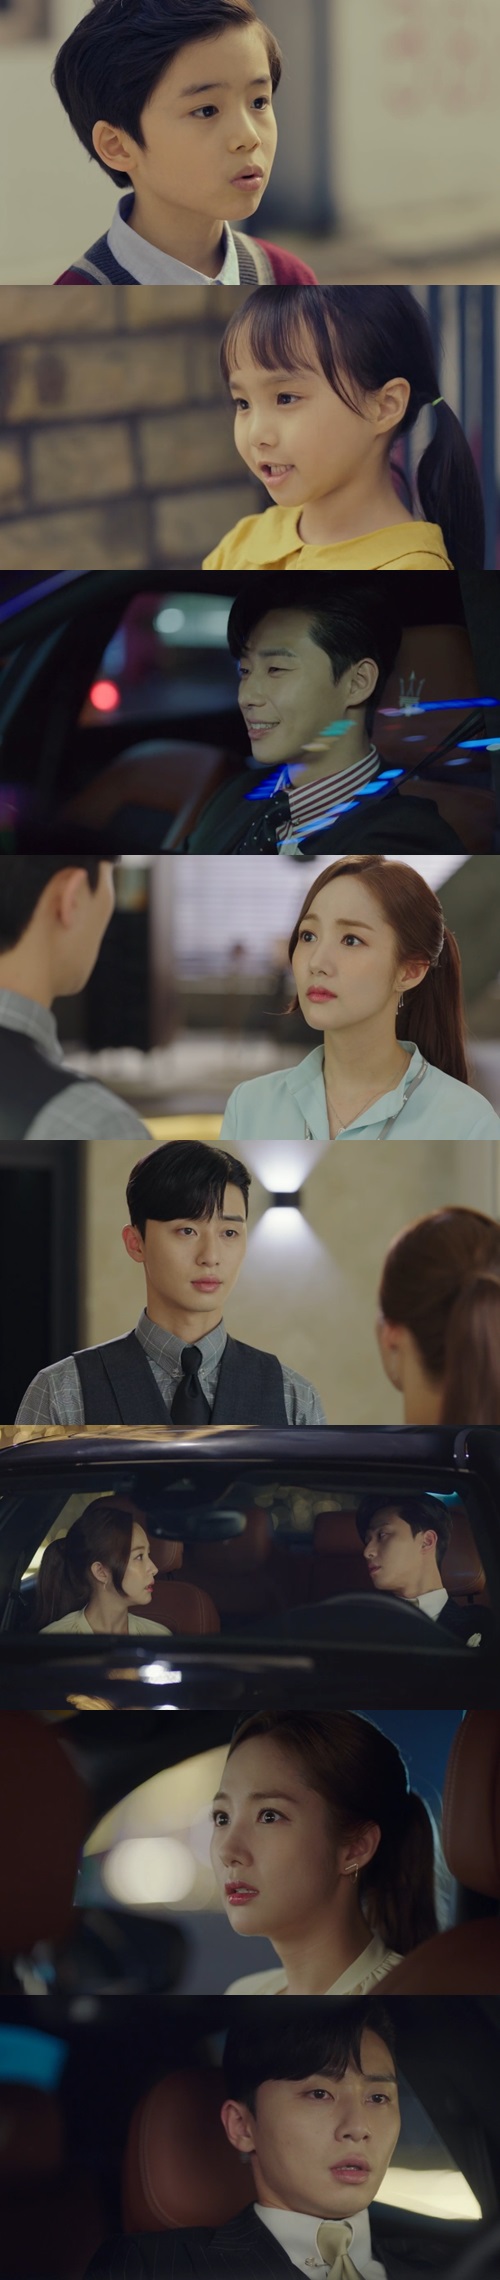 Park Min-young knew the real identity with Park Seo-joons Lie.In the 9th episode (playplay by Jung Eun-young/director Park Joon-hwa), which was broadcast on July 4, TVNs tree drama Why Secretary Kim is?, Park Min-young found out that Lee Yeongjun (Park Seo-joon) was the brother who was kidnapped together in the past.Im sorry I answered too late, Kim said.I like that vice chairman, said Lee Yeongjuns Confessions, and two people became lovers, and Lee Yeongjuns kiss trauma was solved by Kim Mi-so.Lee Yeongjun was terrified to see a woman in question whenever she tried to kiss Kim Mi-so, but when Kim Mi-so kissed her first, she kissed her safely.Lee Yeongjun asked, Lets be sure, is it the beginning of our summer love affair? Kim Mi-so replied, Yes and went away first.Lee Yeongjun called Kim Mi-so, Come with me, my woman.Lee Yeongjun urged me to marry as soon as possible, and Kim Mi-so was embarrassed that he was not too hasty for an hour.The way back Lee Yeongjun recalled a young Kim Mi-so.Lee Yeongjun recalled the memory that Kim Mi-so had asked him to marry and went back to Kim Mi-so and said, Im afraid Ill miss you. Im afraid Kim would miss you.Lee Yeongjun became clear that the person who was kidnapped with Kim Mi-so in the past with his childhood memory.But Kim Mi-so said, I want to ask you something. Is my brother really the writer I was looking for? I know it sounds strange, but I keep thinking he is his brother.Im not his brother, Lee Yeongjun said, Im not a traumatized person, and Im a nightmare.I dont care about nightmares or hurts, Lie said.When Lee Yeongjun asked, What does it matter if he is his brother or not? Does Kim like me differently? Kim Mi-so said, I do not care.Regardless of that, the former vice chairman is good. In the meantime, Lee Sung-yeon (Lee Tae-hwan) was angry at Lee Yeongjun, asking Kim Mi-so, who does not answer the phone after the public Confessions, Is it because of Young Jun?Lee Seong-yeon went on to claim that Lee Yeongjun had a hard time being kidnapped and taken away.Meanwhile, Kim Mi-sos suspicions grew deeper and deeper.Lee Yeongjun brought up the story of Desiigner, an acquaintance of his mother who knew from childhood, saying that the burgundy color suits him well, and Kim Mi-so recalled the story he had heard from Choi (Kim Hye-ok).Choi said that he talked about the clothes of his son who was kidnapped in the past and talked about the Desiigner, and that he was worried about his son who was cold like Lee Yeongjun.Lee Sung-yeon, who claims to have been kidnapped, did not get cold much.Kim Mi-so, who made a strange feeling, recalled the name Hyun-yi that Choi told Lee Yeongjun who fell asleep in the car and called it Sung Hyun-hyun brother and Lee Yeongjun answered Why?Kim Mi-so was surprised to learn that Lee Sung-hyun, who was kidnapped in the past, was Lee Yeongjun, and Lee Yeongjun was also surprised to wake up.Yoo Gyeong-sang